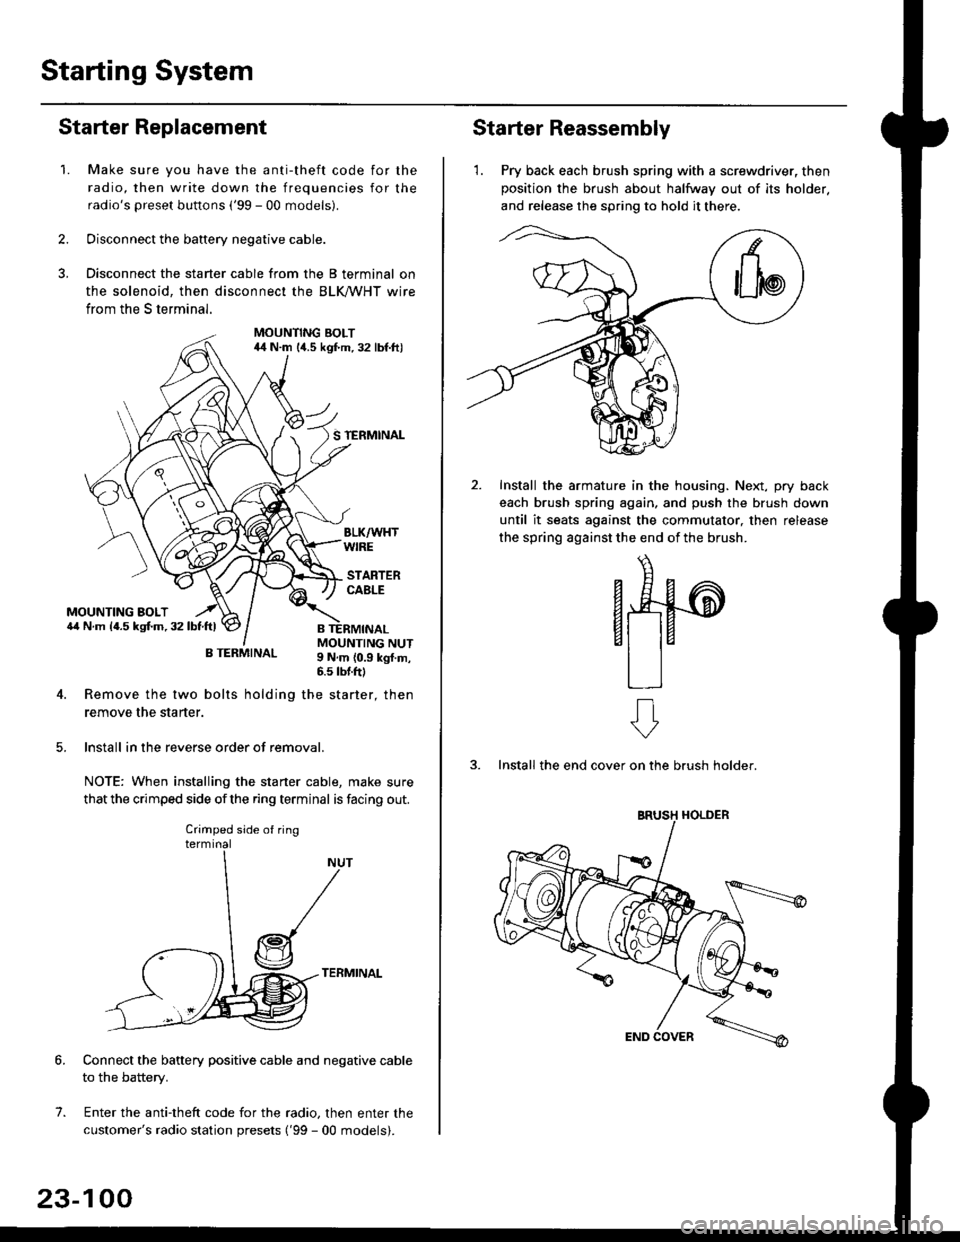 HONDA CIVIC 1996 6.G User Guide Starting System
Starter Replacement
1.Make sure you have the anti-theft code for the
radio, then write down the frequencies for the
radios preset buttons (99 - 00 models).
Disconnect the battery neg